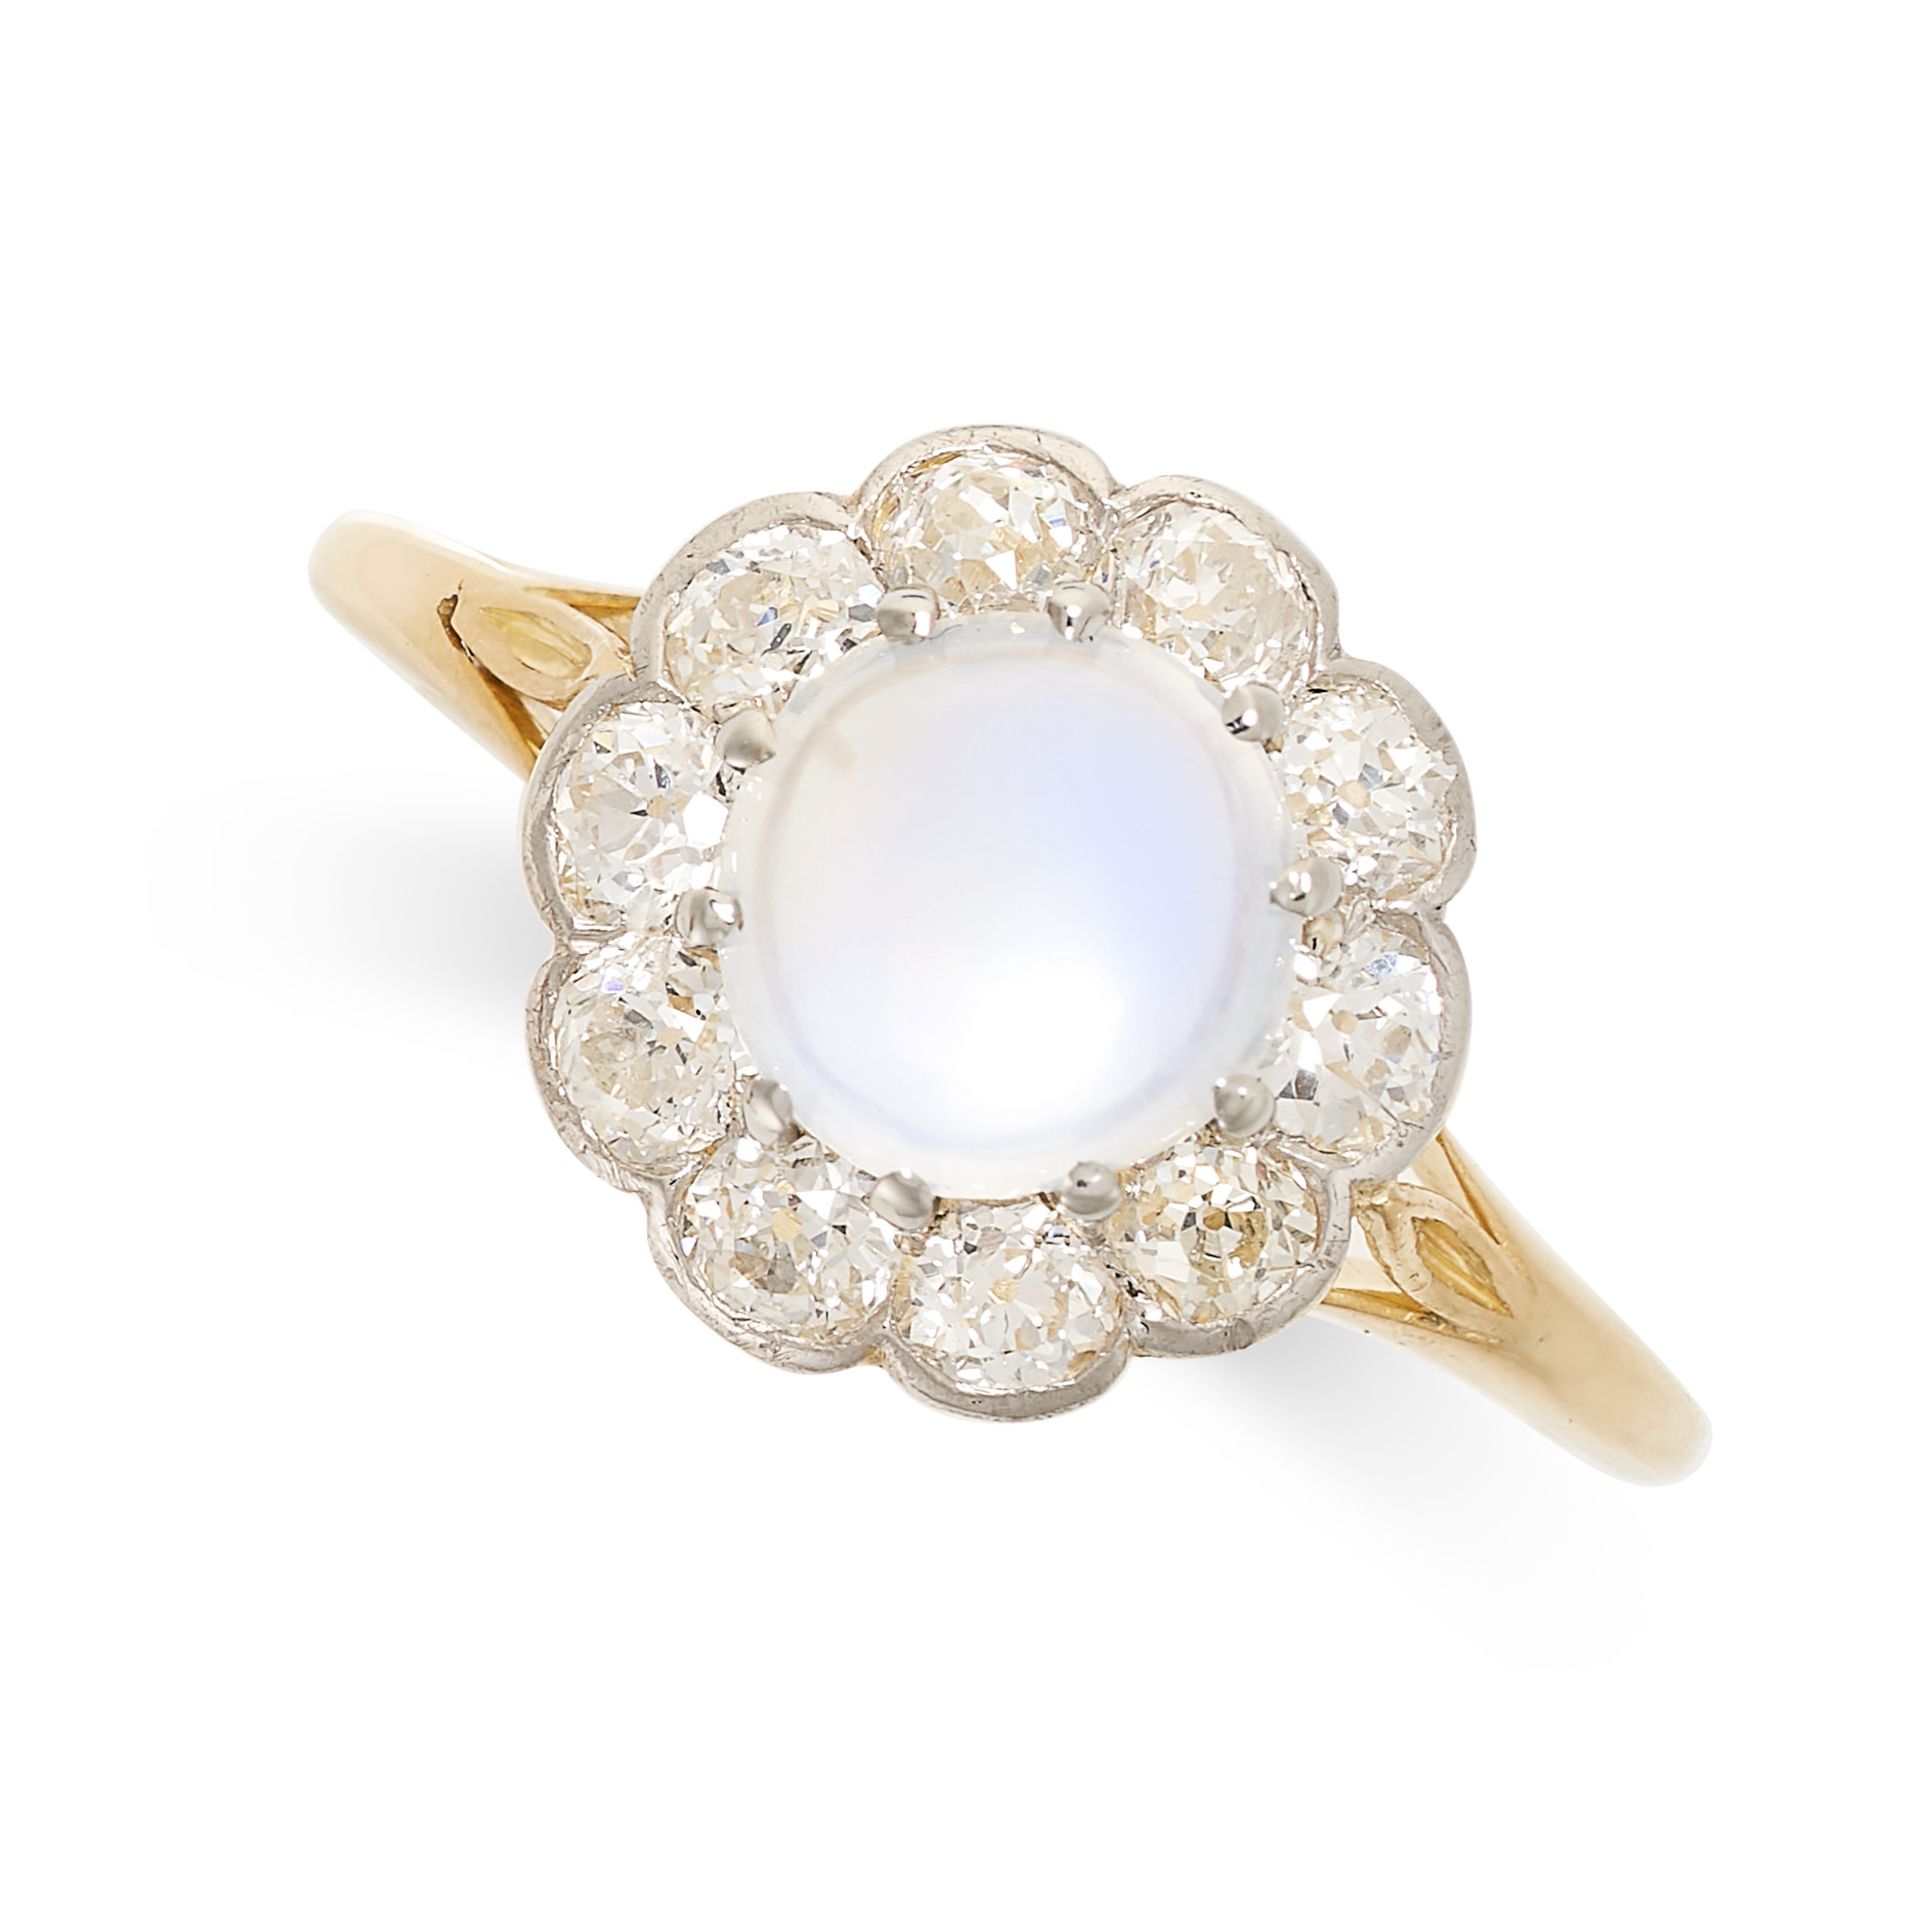 AN ANTIQUE MOONSTONE AND DIAMOND DRESS RING in high carat yellow gold, set with a round cabochon